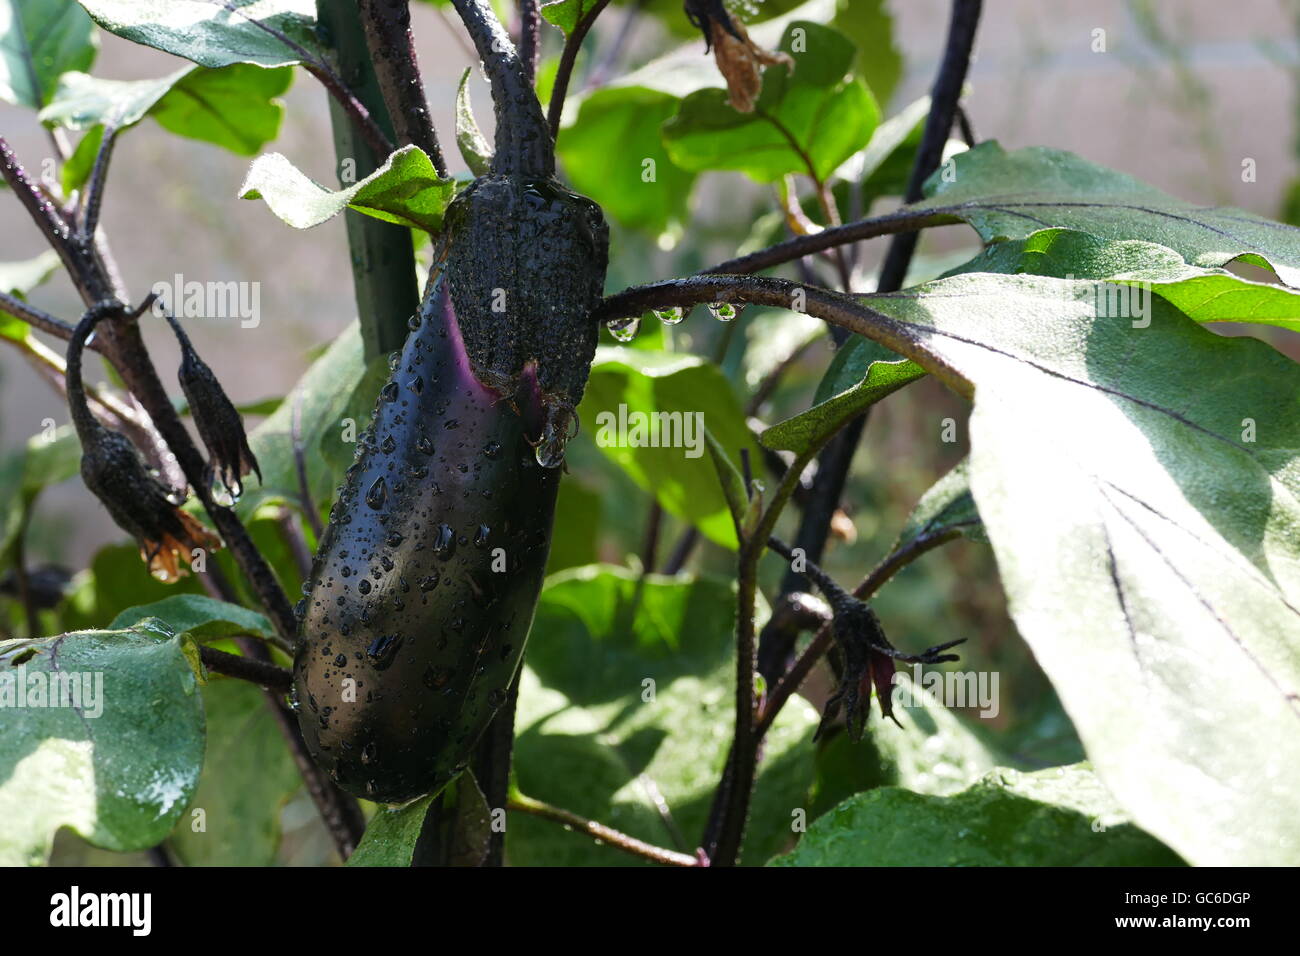 Growing eggplant in farm garden at Los Angeles Stock Photo